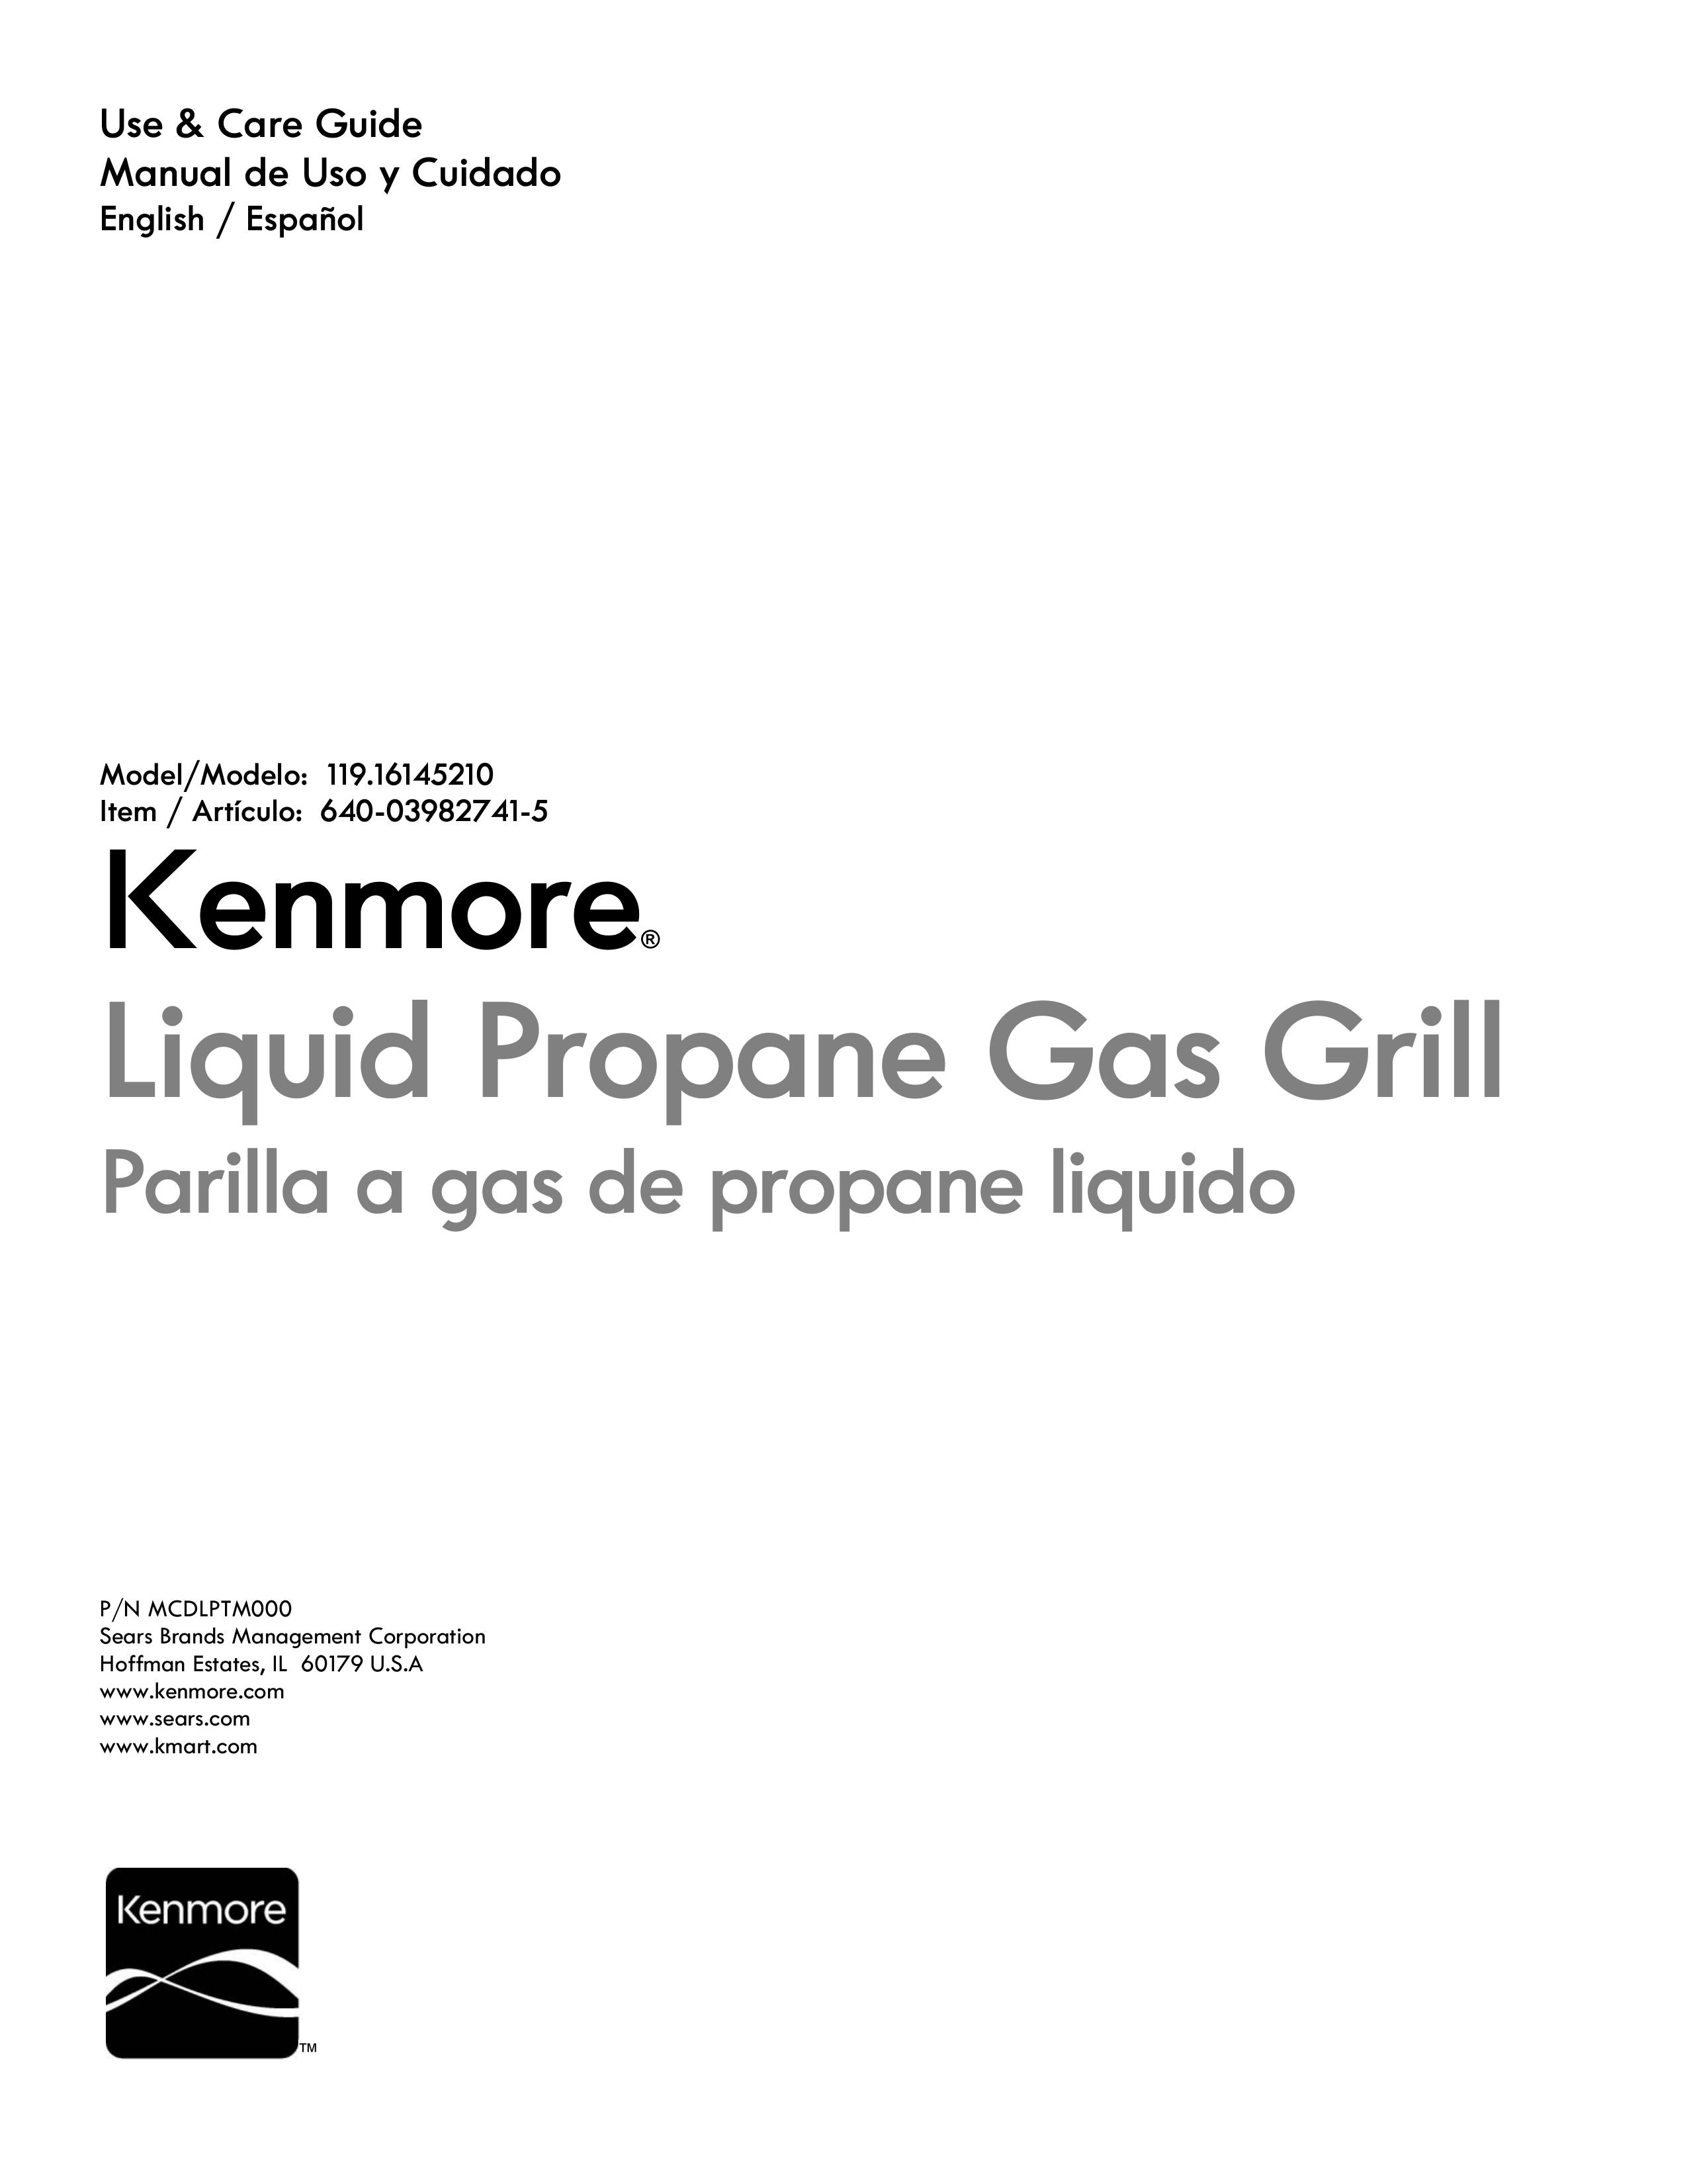 Kenmore 119.1614521 Gas Grill User Manual